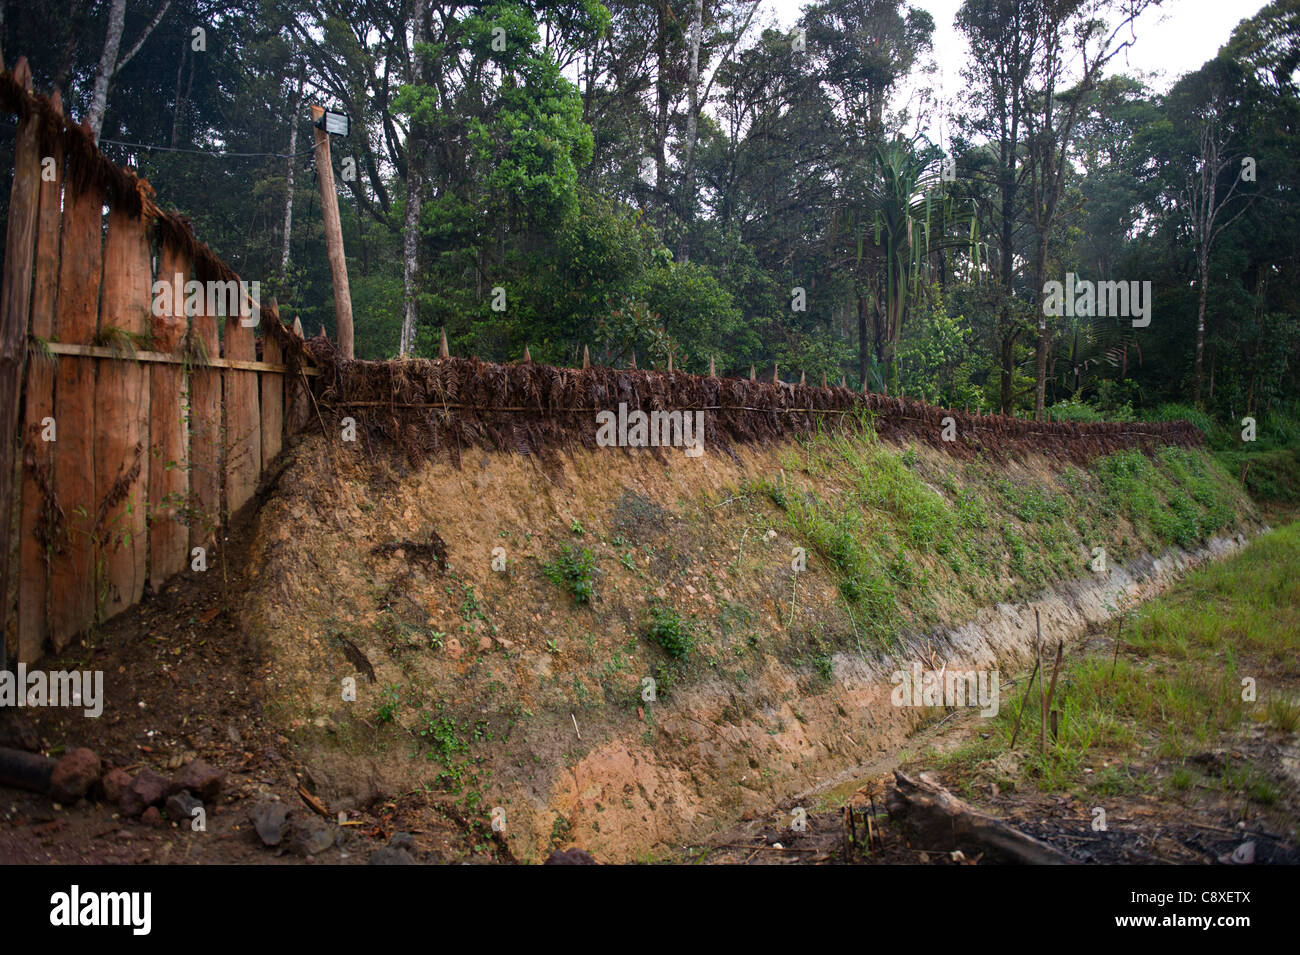 Fortification, moat and stakes around habitation in Tari Valley Southern Highlands Papua New Guinea Stock Photo